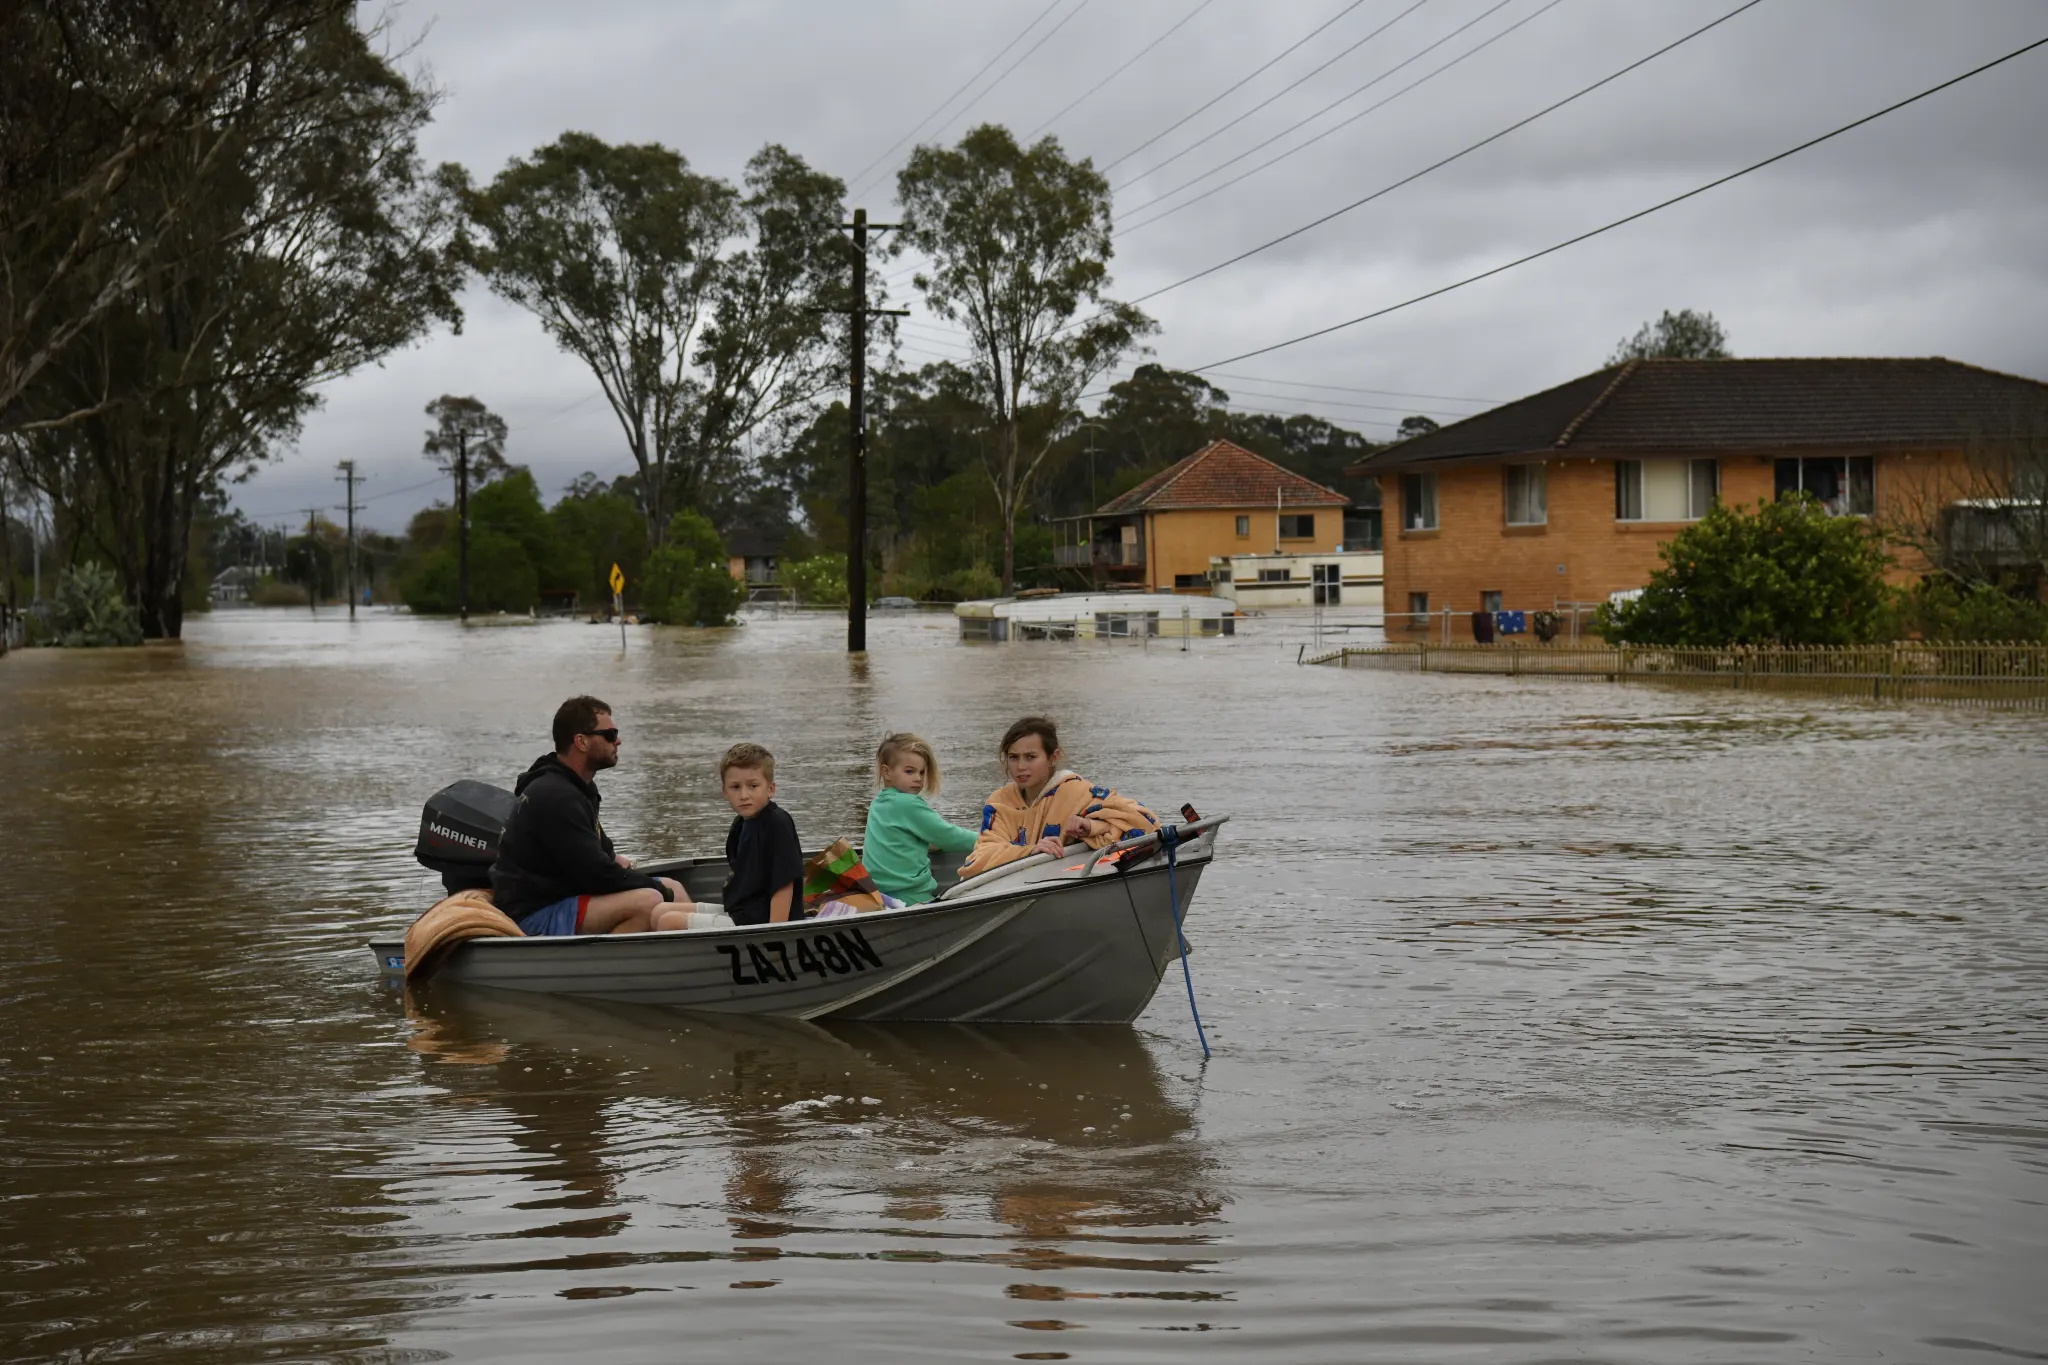 The Turner family children were rescued from the second story of their Shanes Park home in north-west Sydney on 5 July 2022, after the fourth flood in less than 18 months. Photo: Dean Sewell / The Sydney Morning Herald